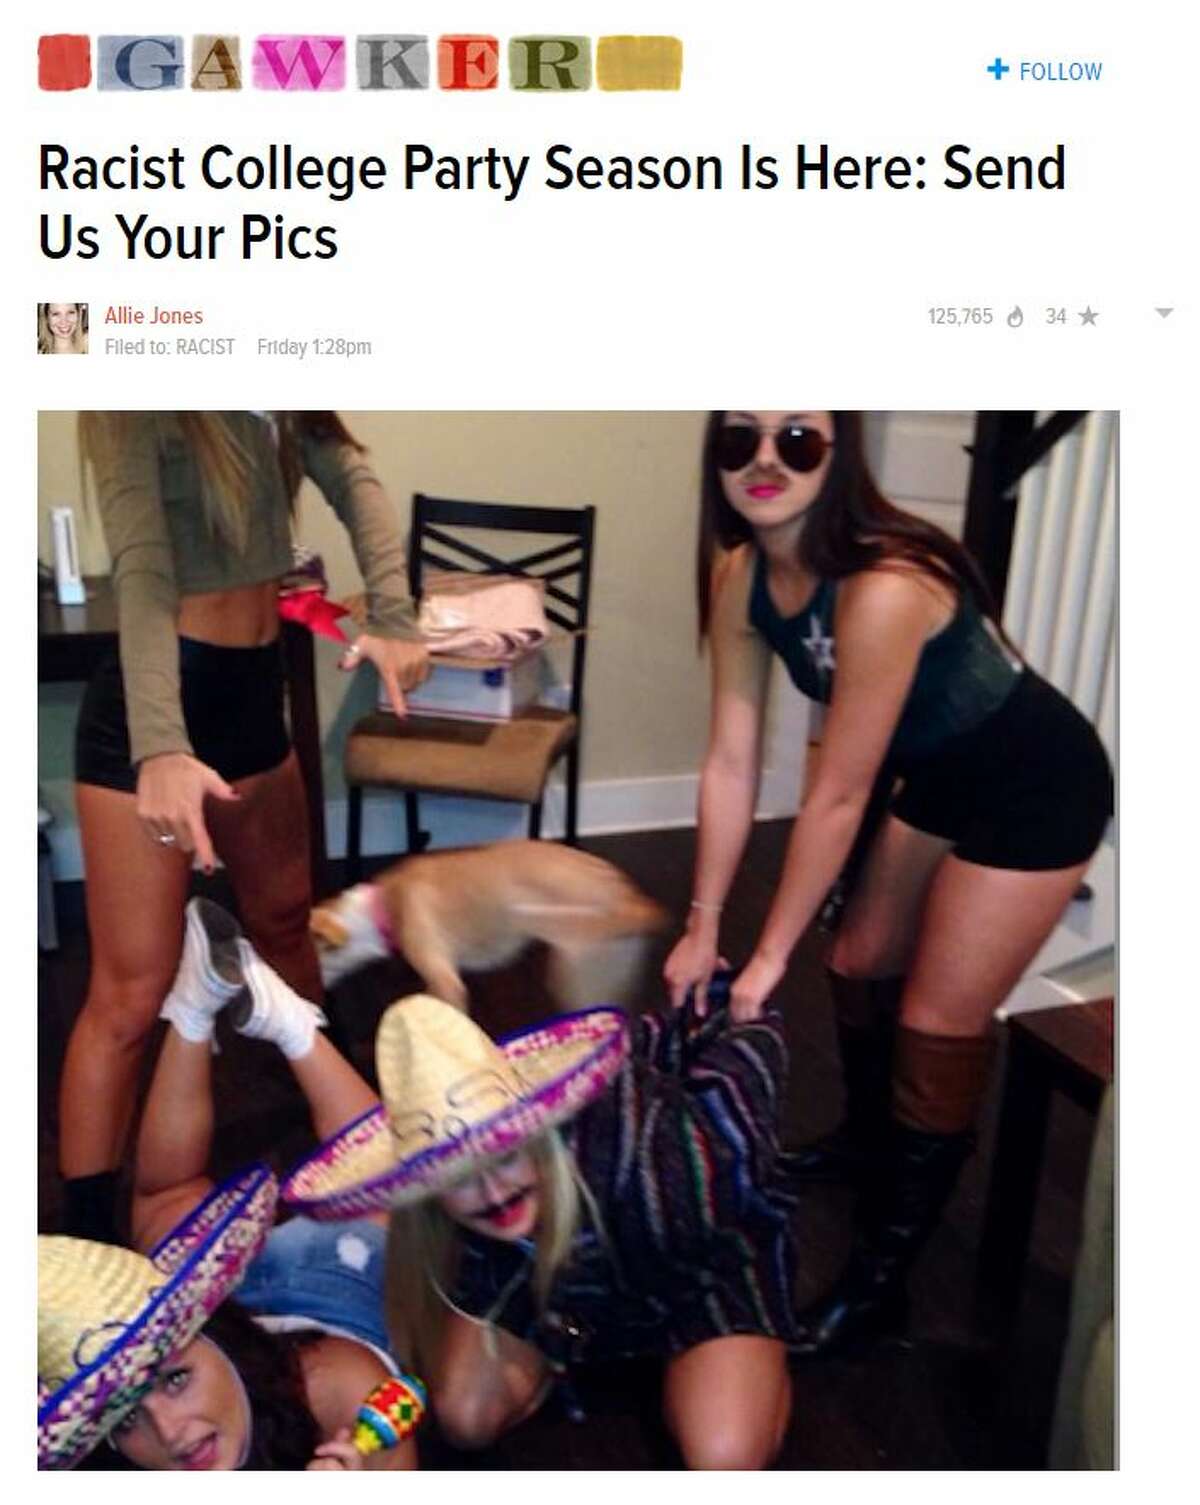 Officials at Texas Tech University are investigating photos of women who are allegedly part of the university's members of Zeta Tau Alpha international women’s fraternity holding a "Border Patrol" party in photos leaked anonymously to Gawker.